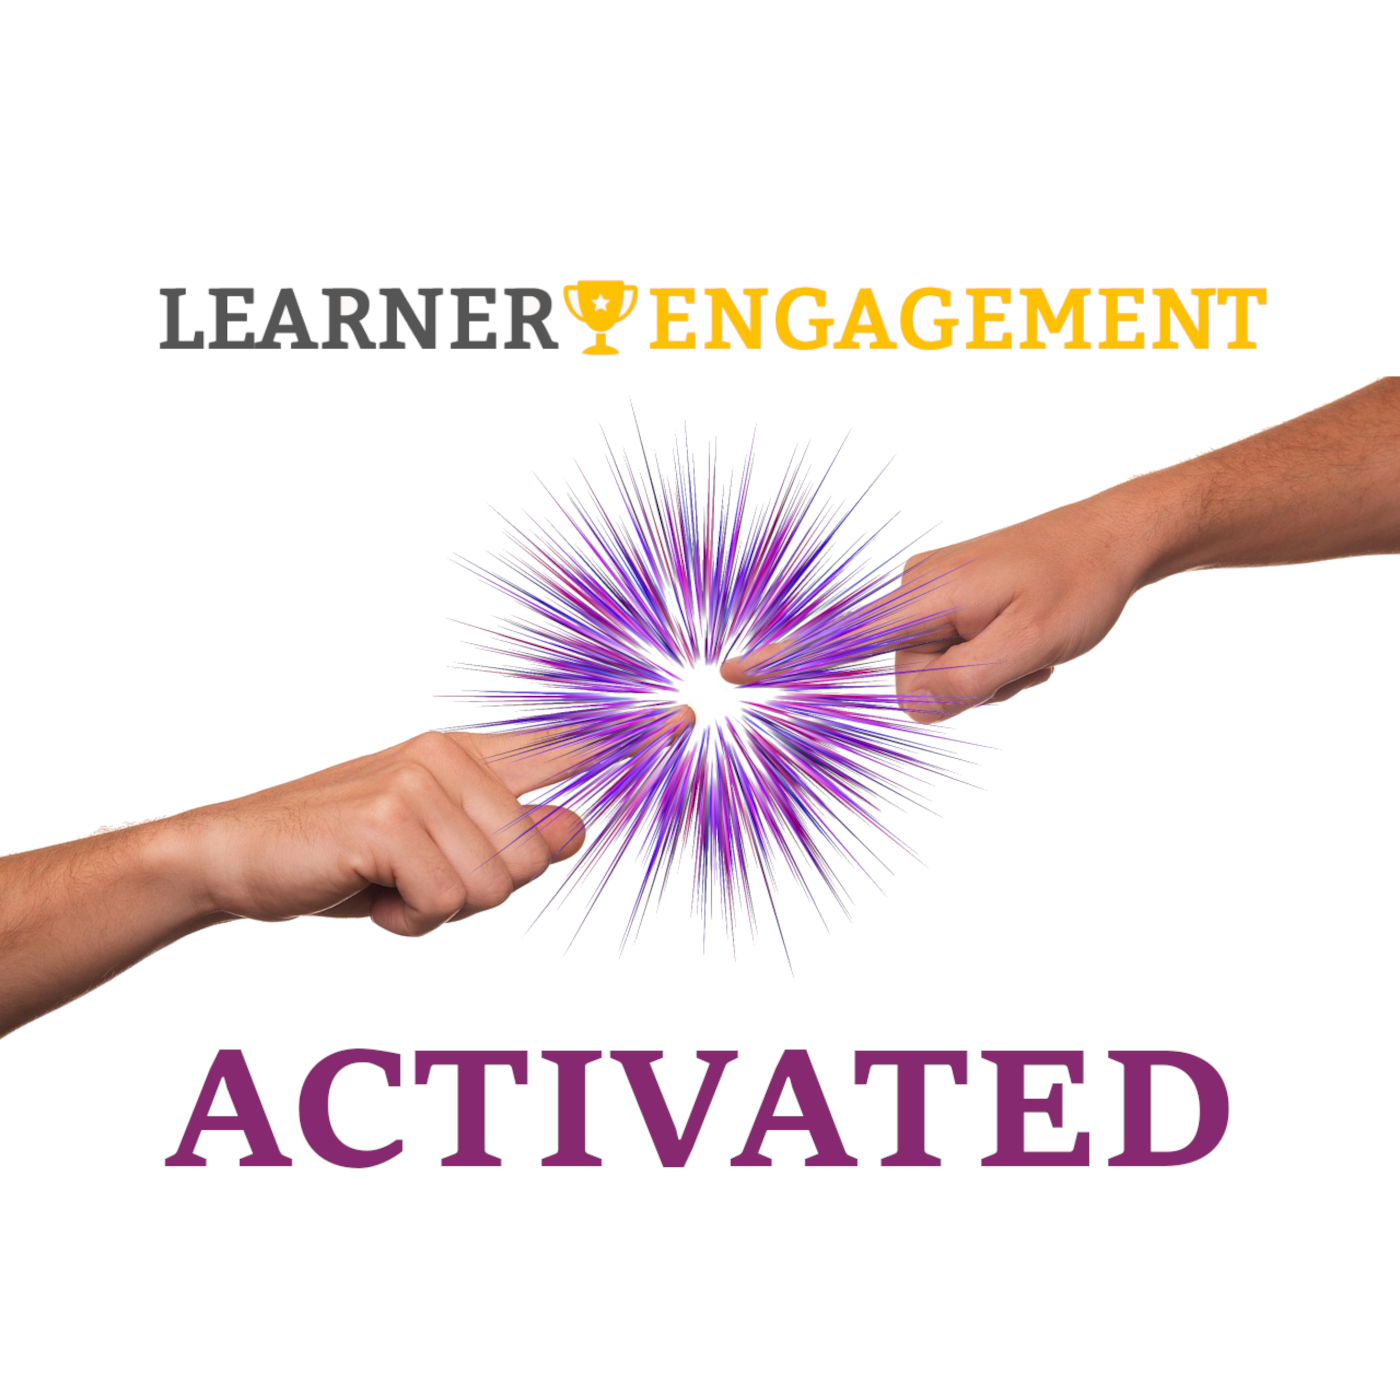 Learner Engagement Activated